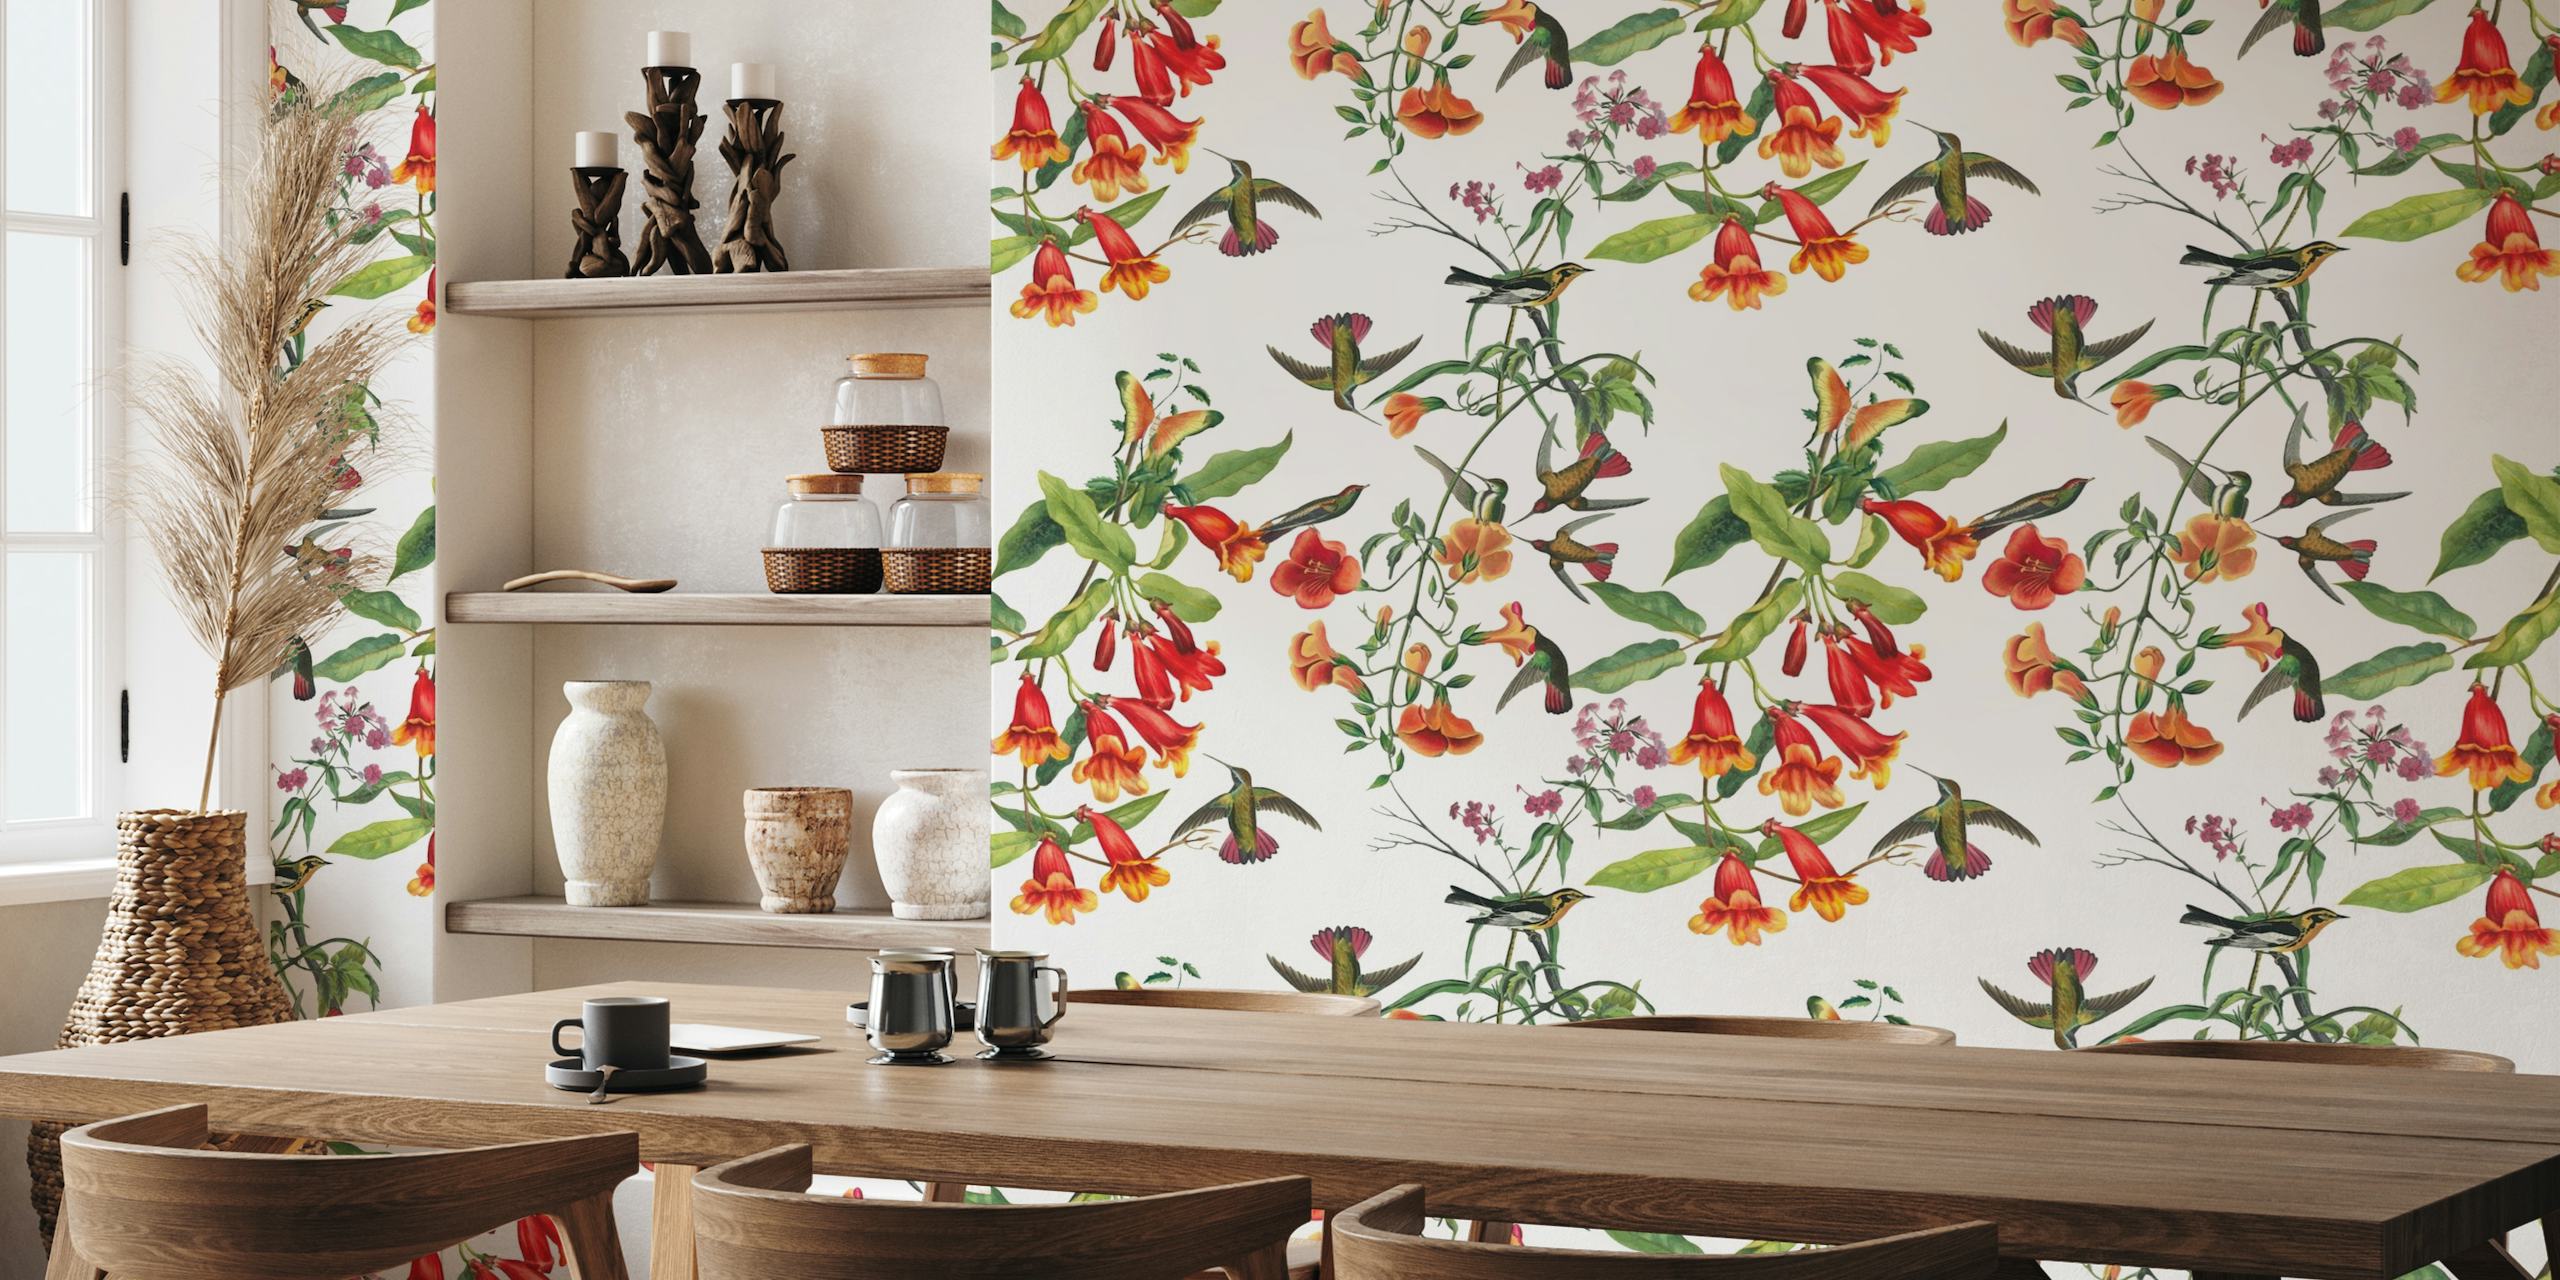 Vibrant hummingbirds fluttering around a diverse array of colorful flowers on a wall mural